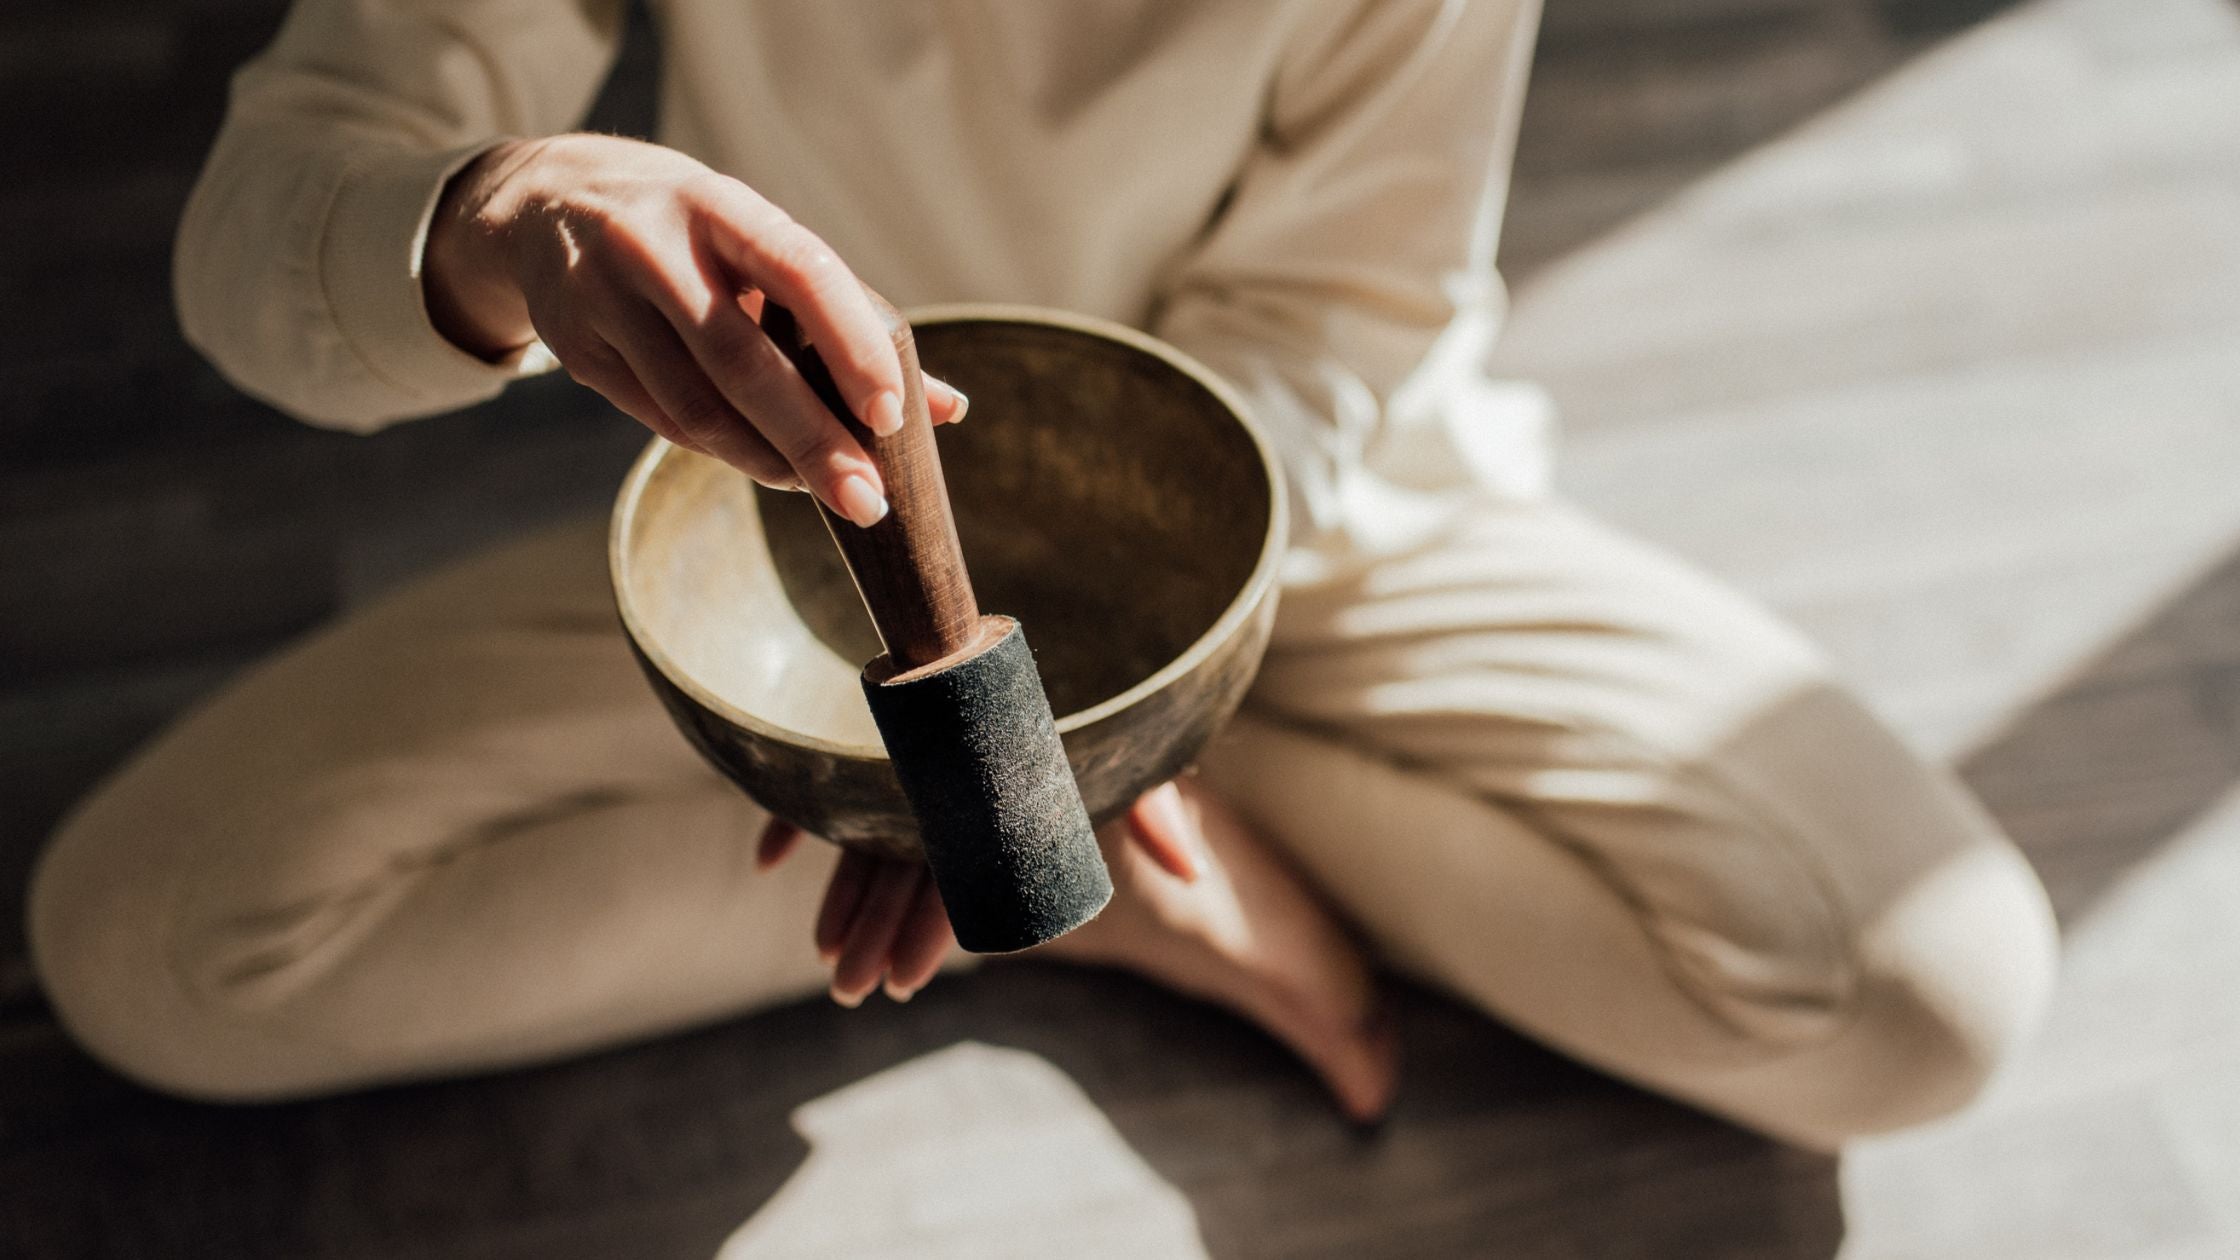 Metal singing bowls provide complex, grounding, easy-to-play, low-sensitivity sounds.